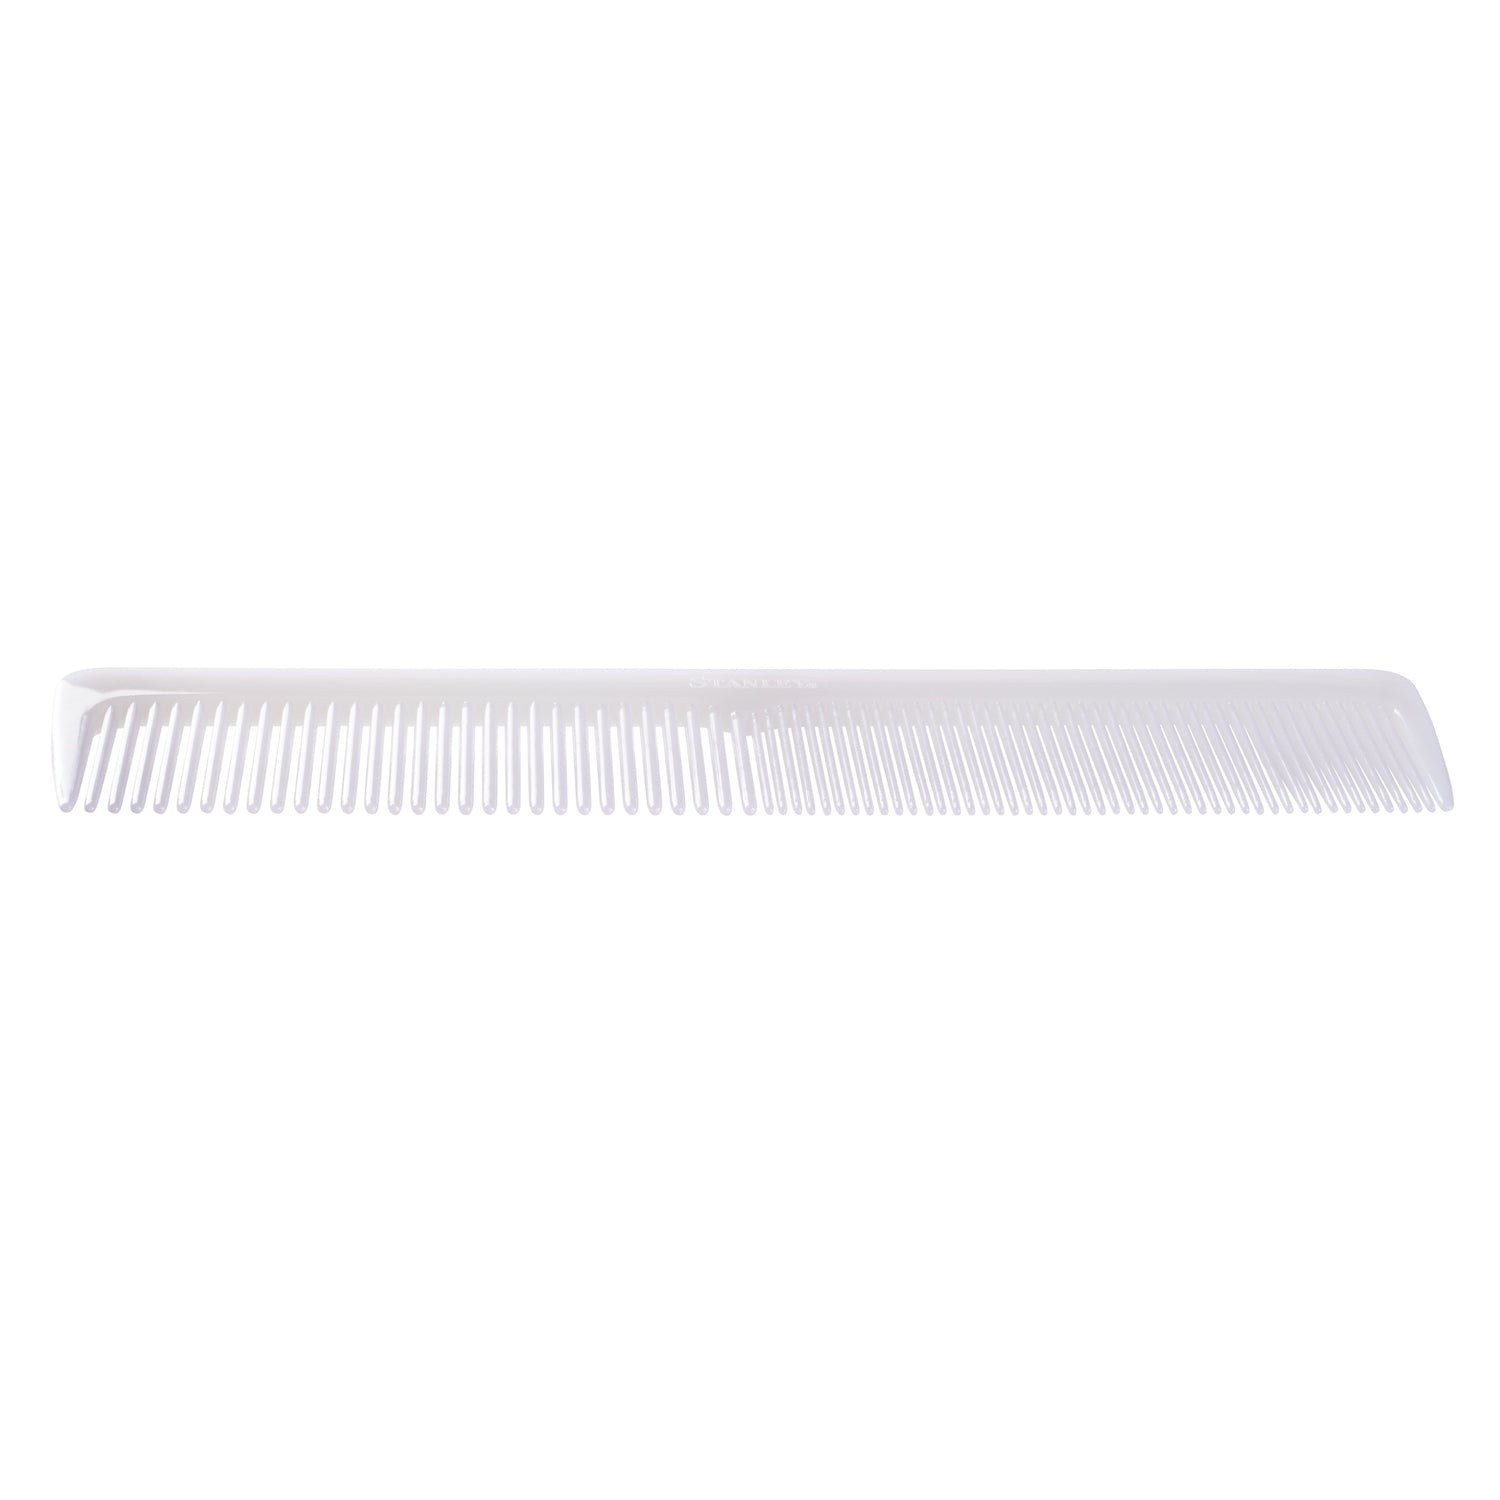 Ladies Comb, Convenient Styling Comb, Anti Static, Chemical & Heat Resistant-Combs-Fuller Brush Company